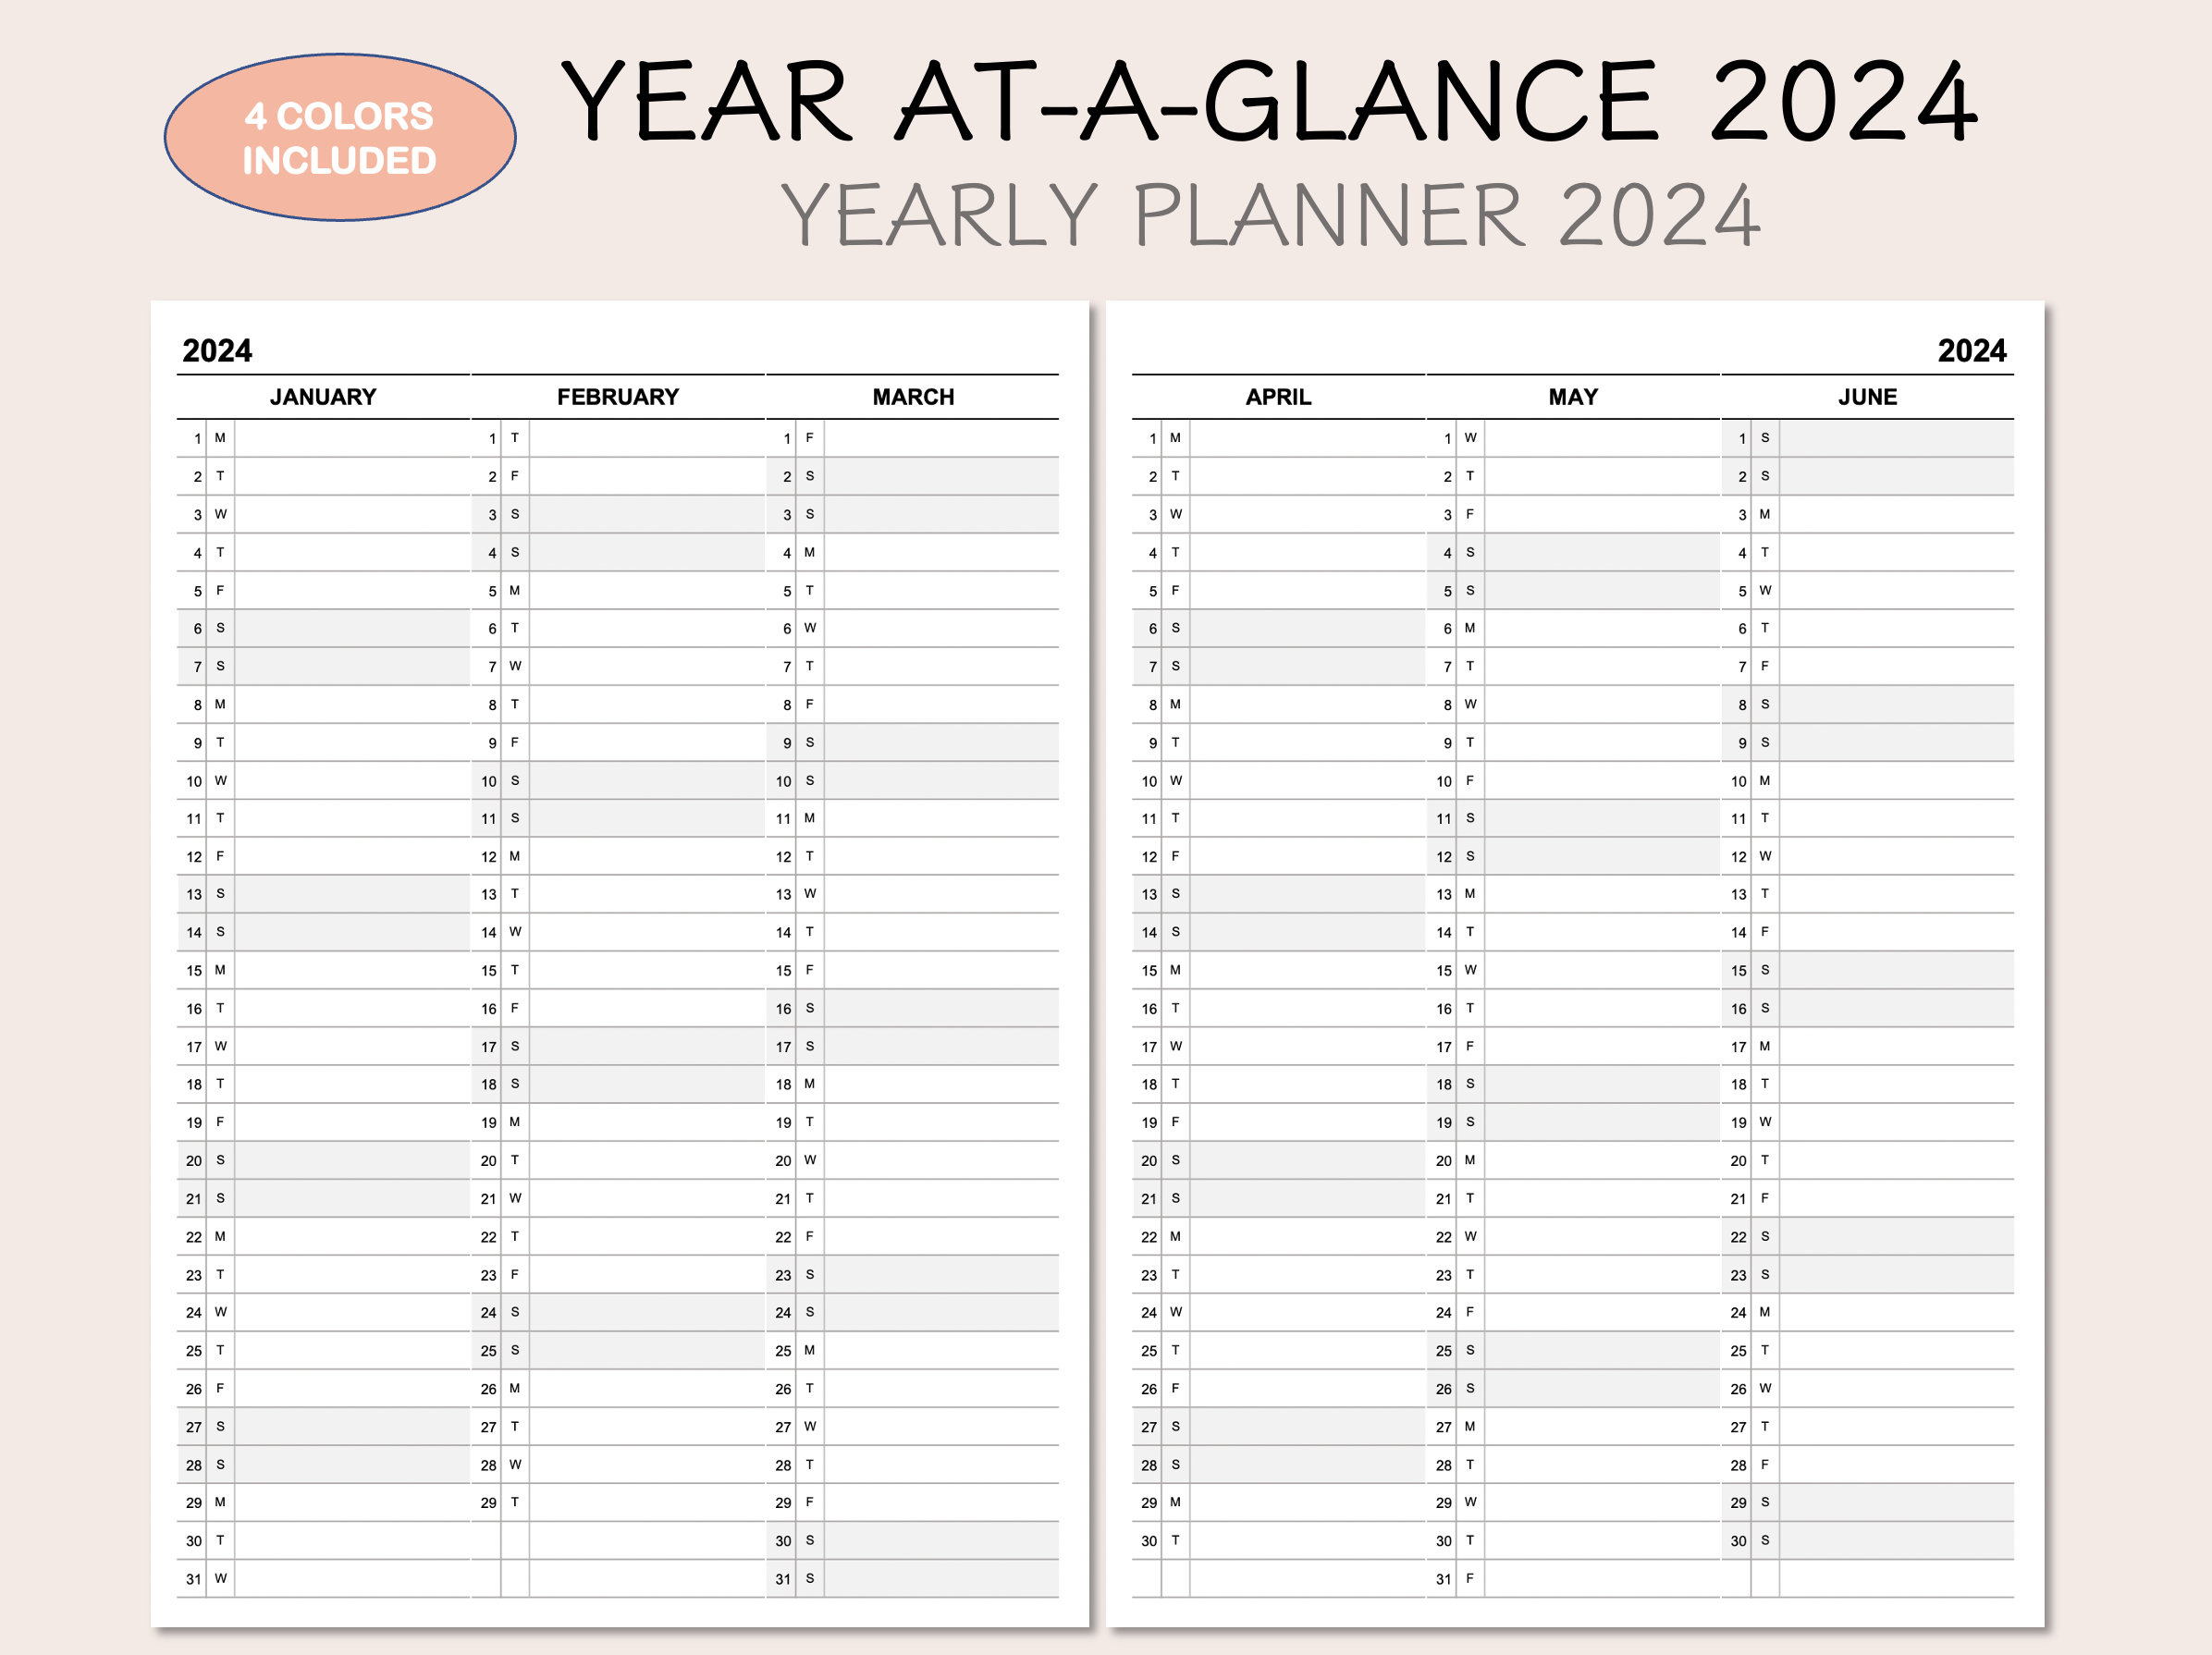 Printable Yearly Planner Calendar 2024 Yearly Overview 2024 - Etsy Uk |  Calendar 2024